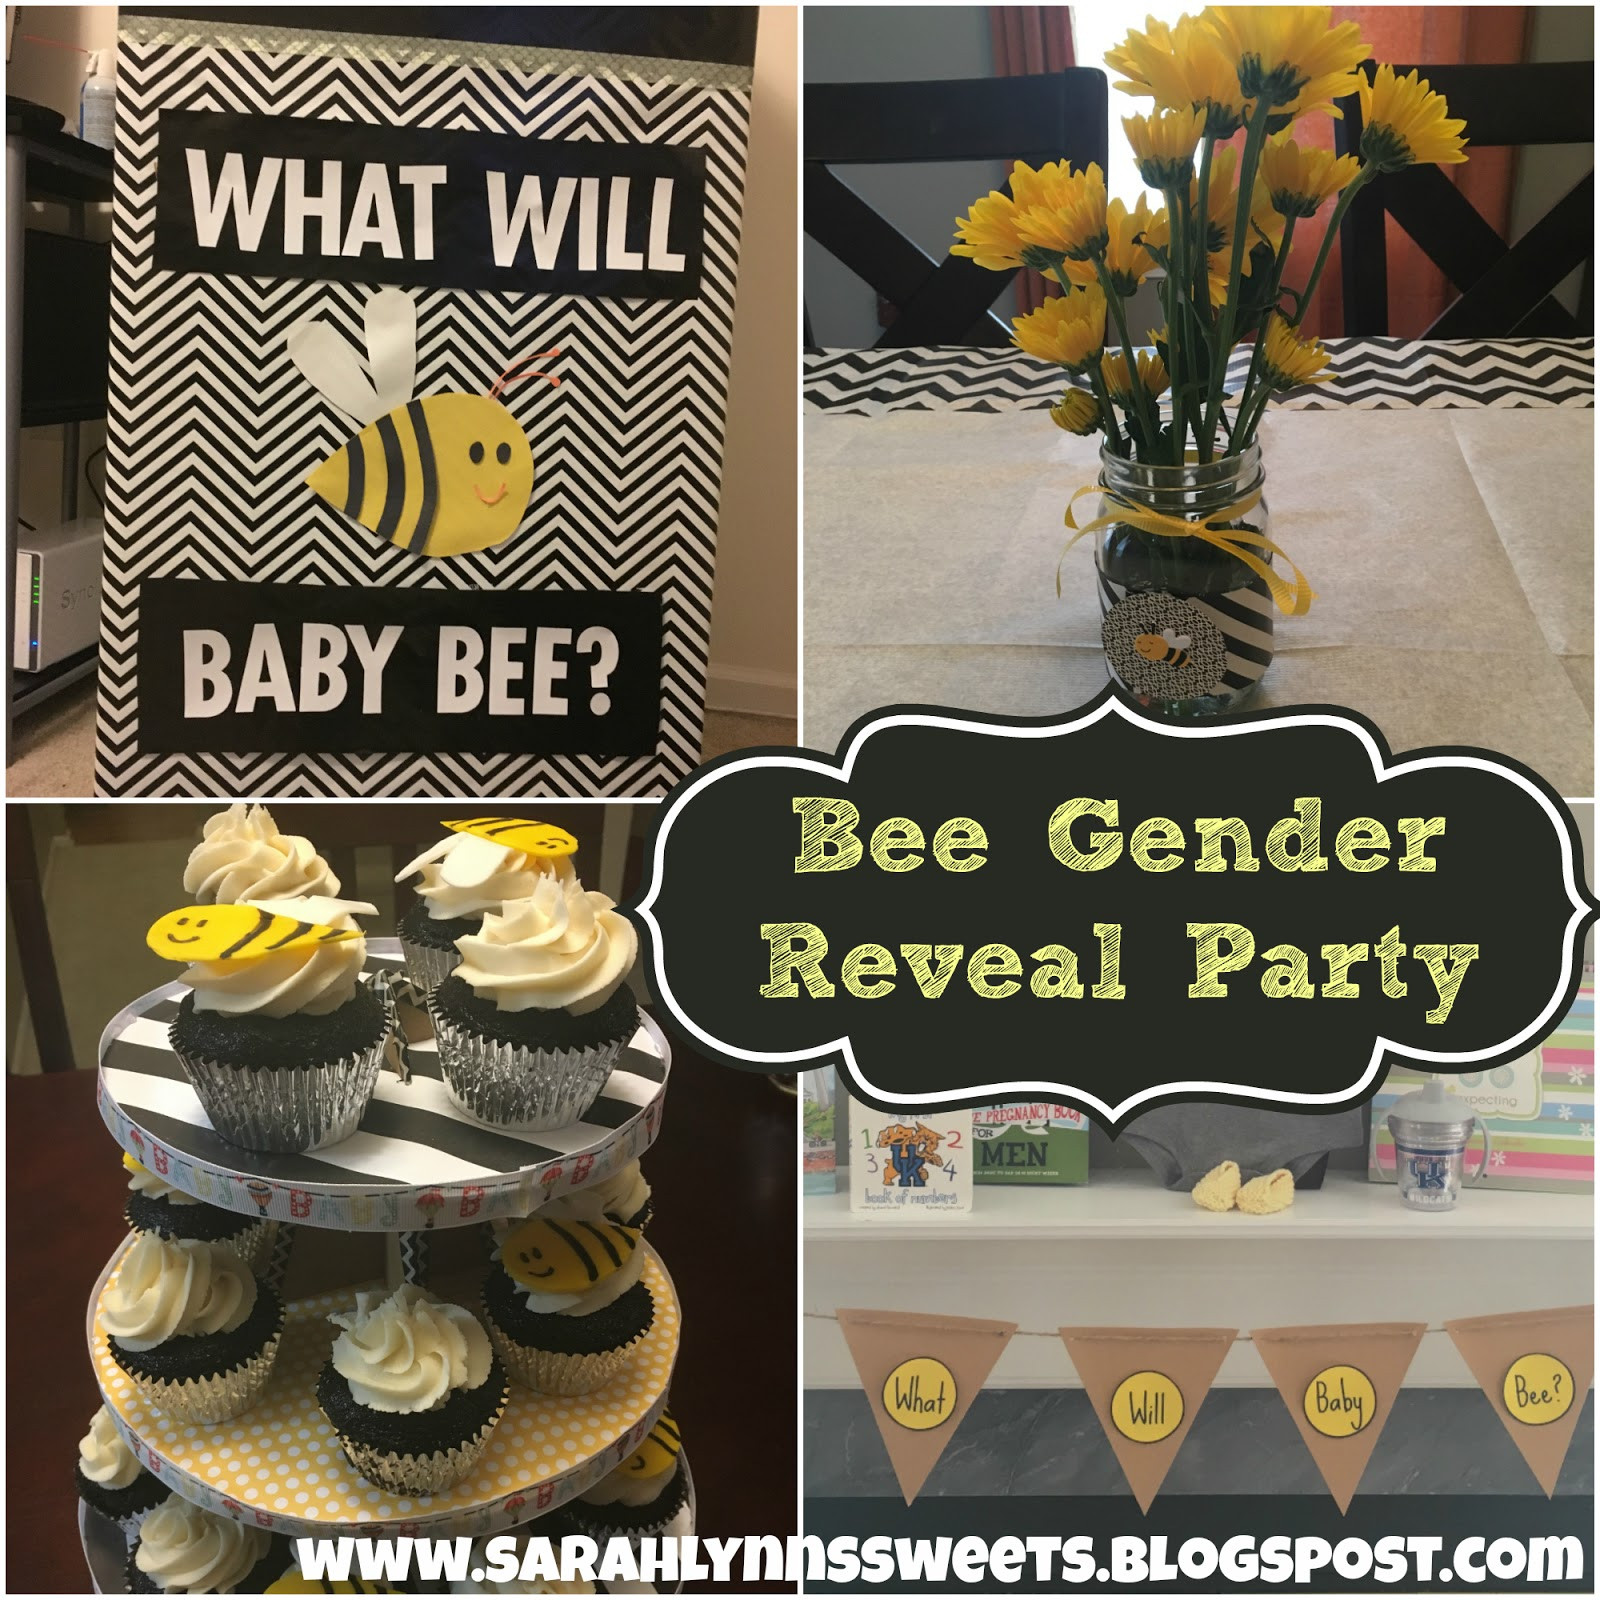 What Will It Bee Gender Reveal Party Ideas
 What Will Baby "Bee" Gender Reveal Party